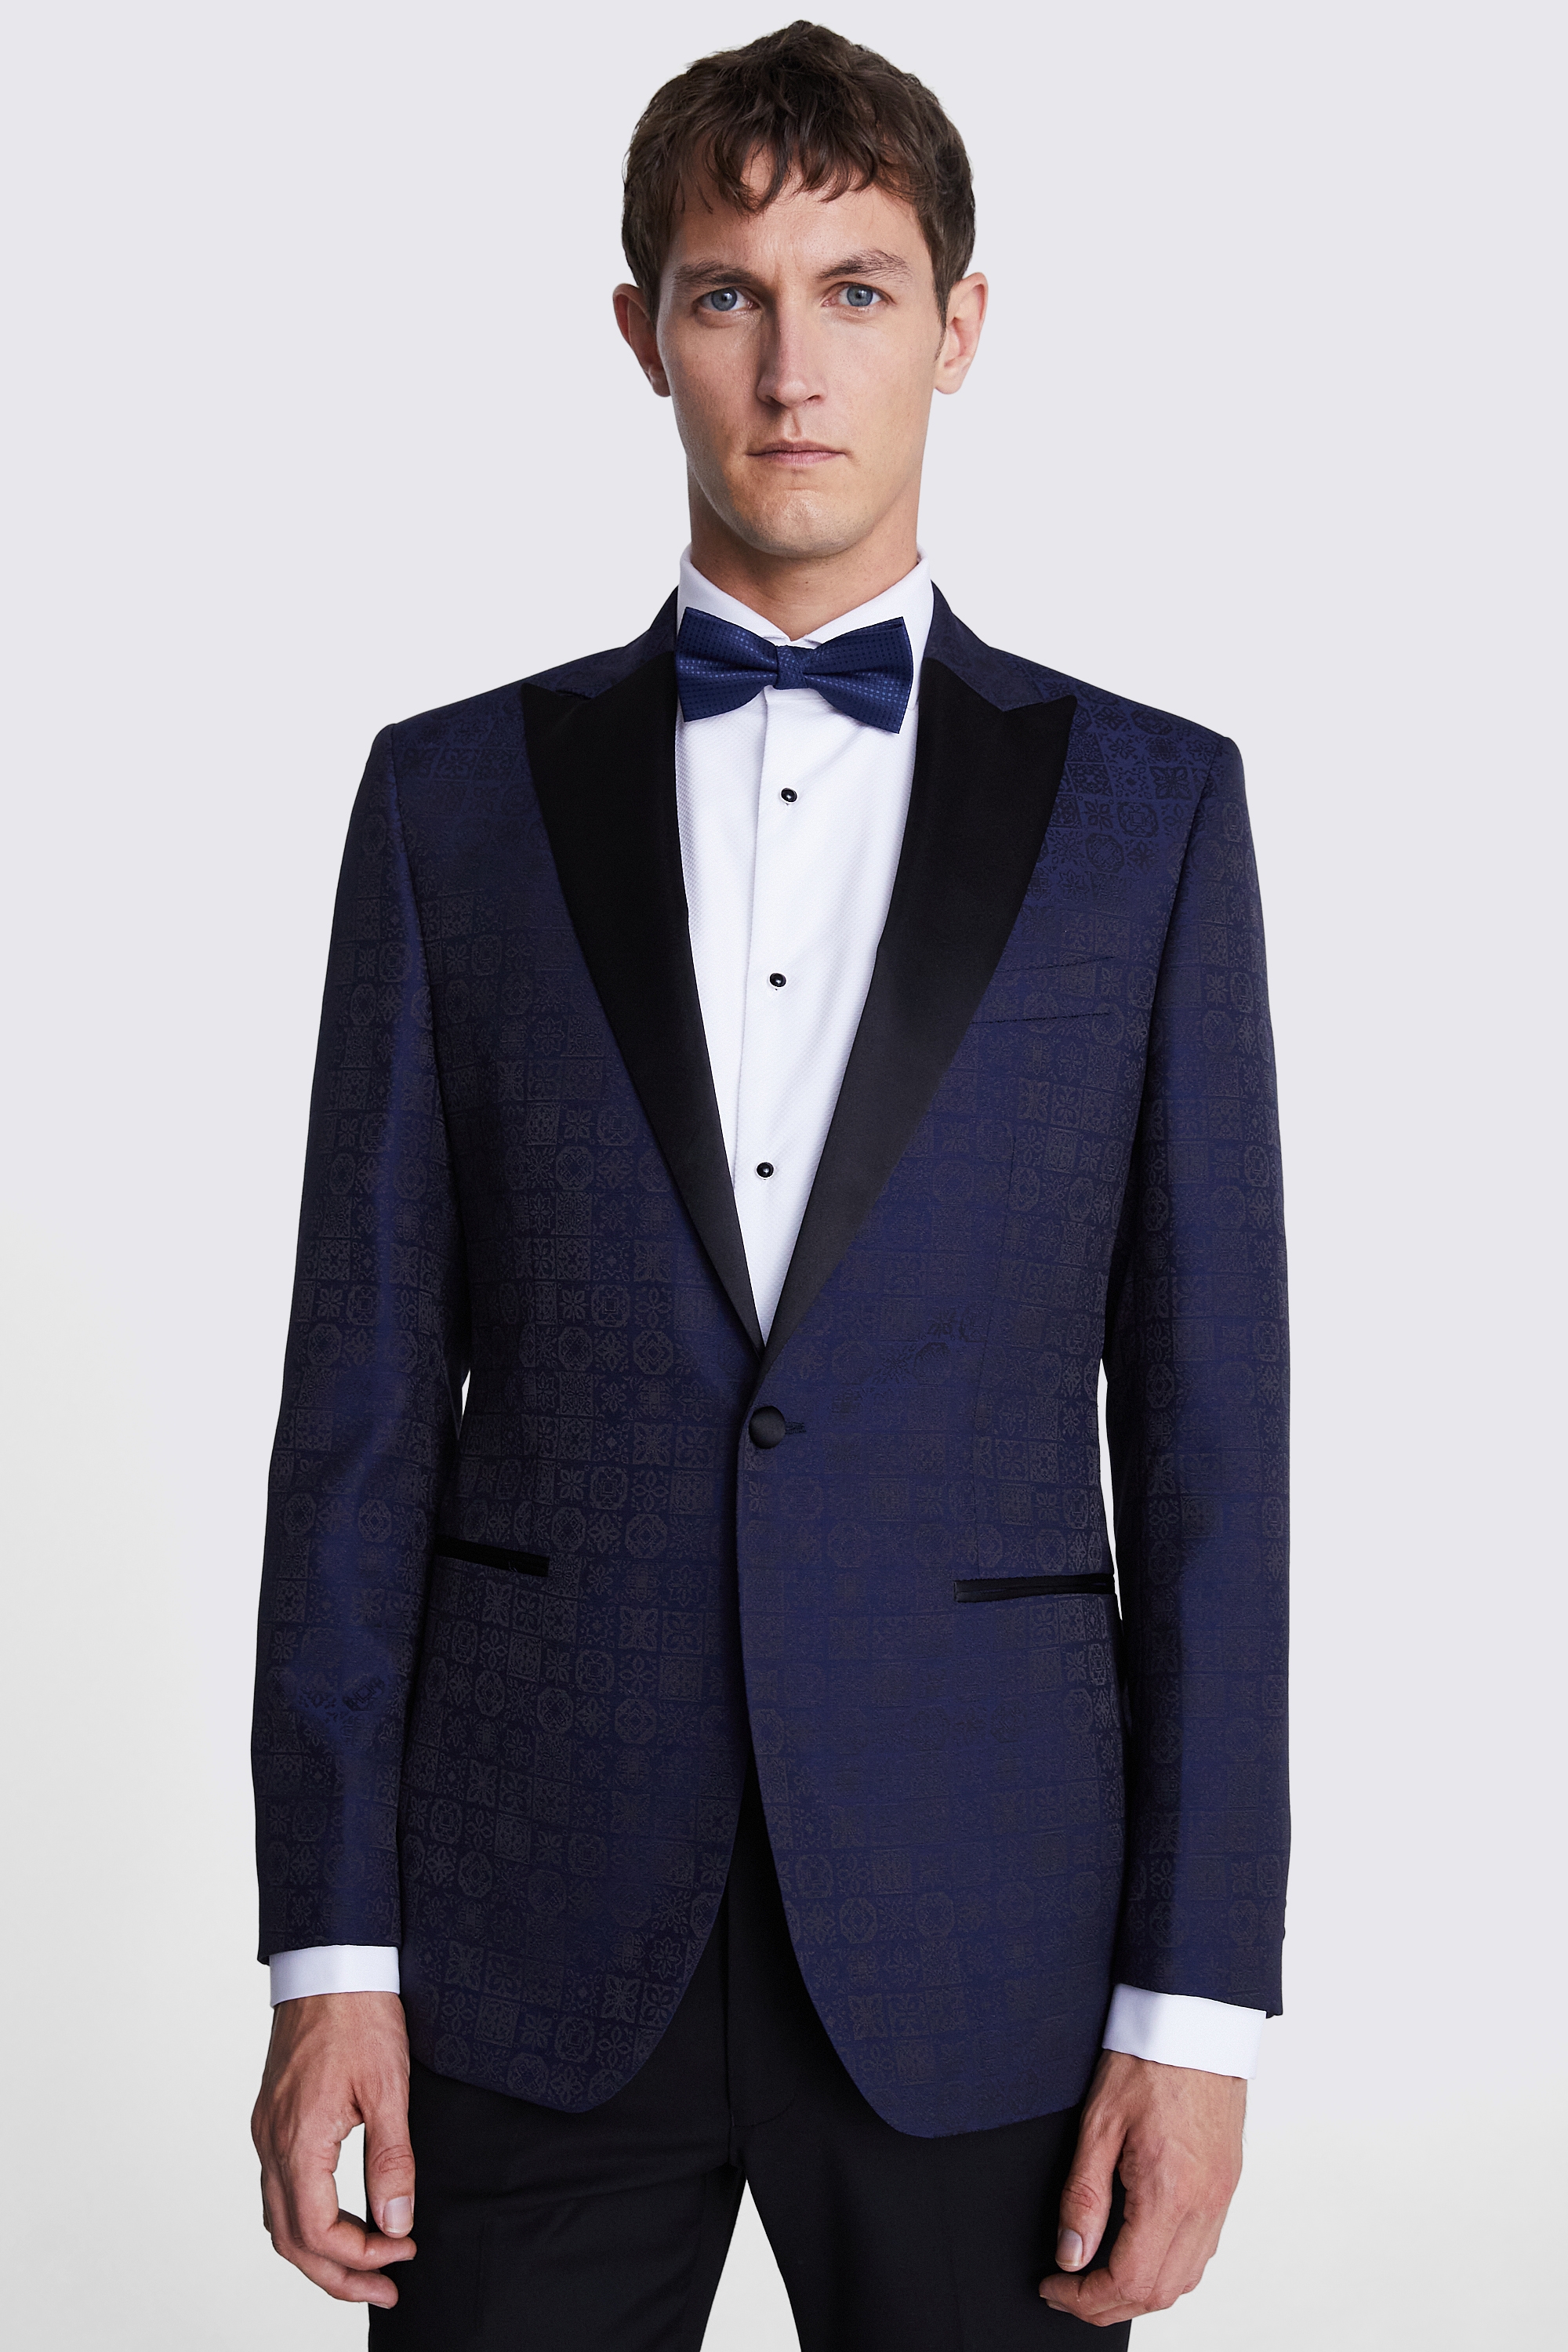 Tailored Fit Navy Jaquard Tuxedo Jacket | Buy Online at Moss